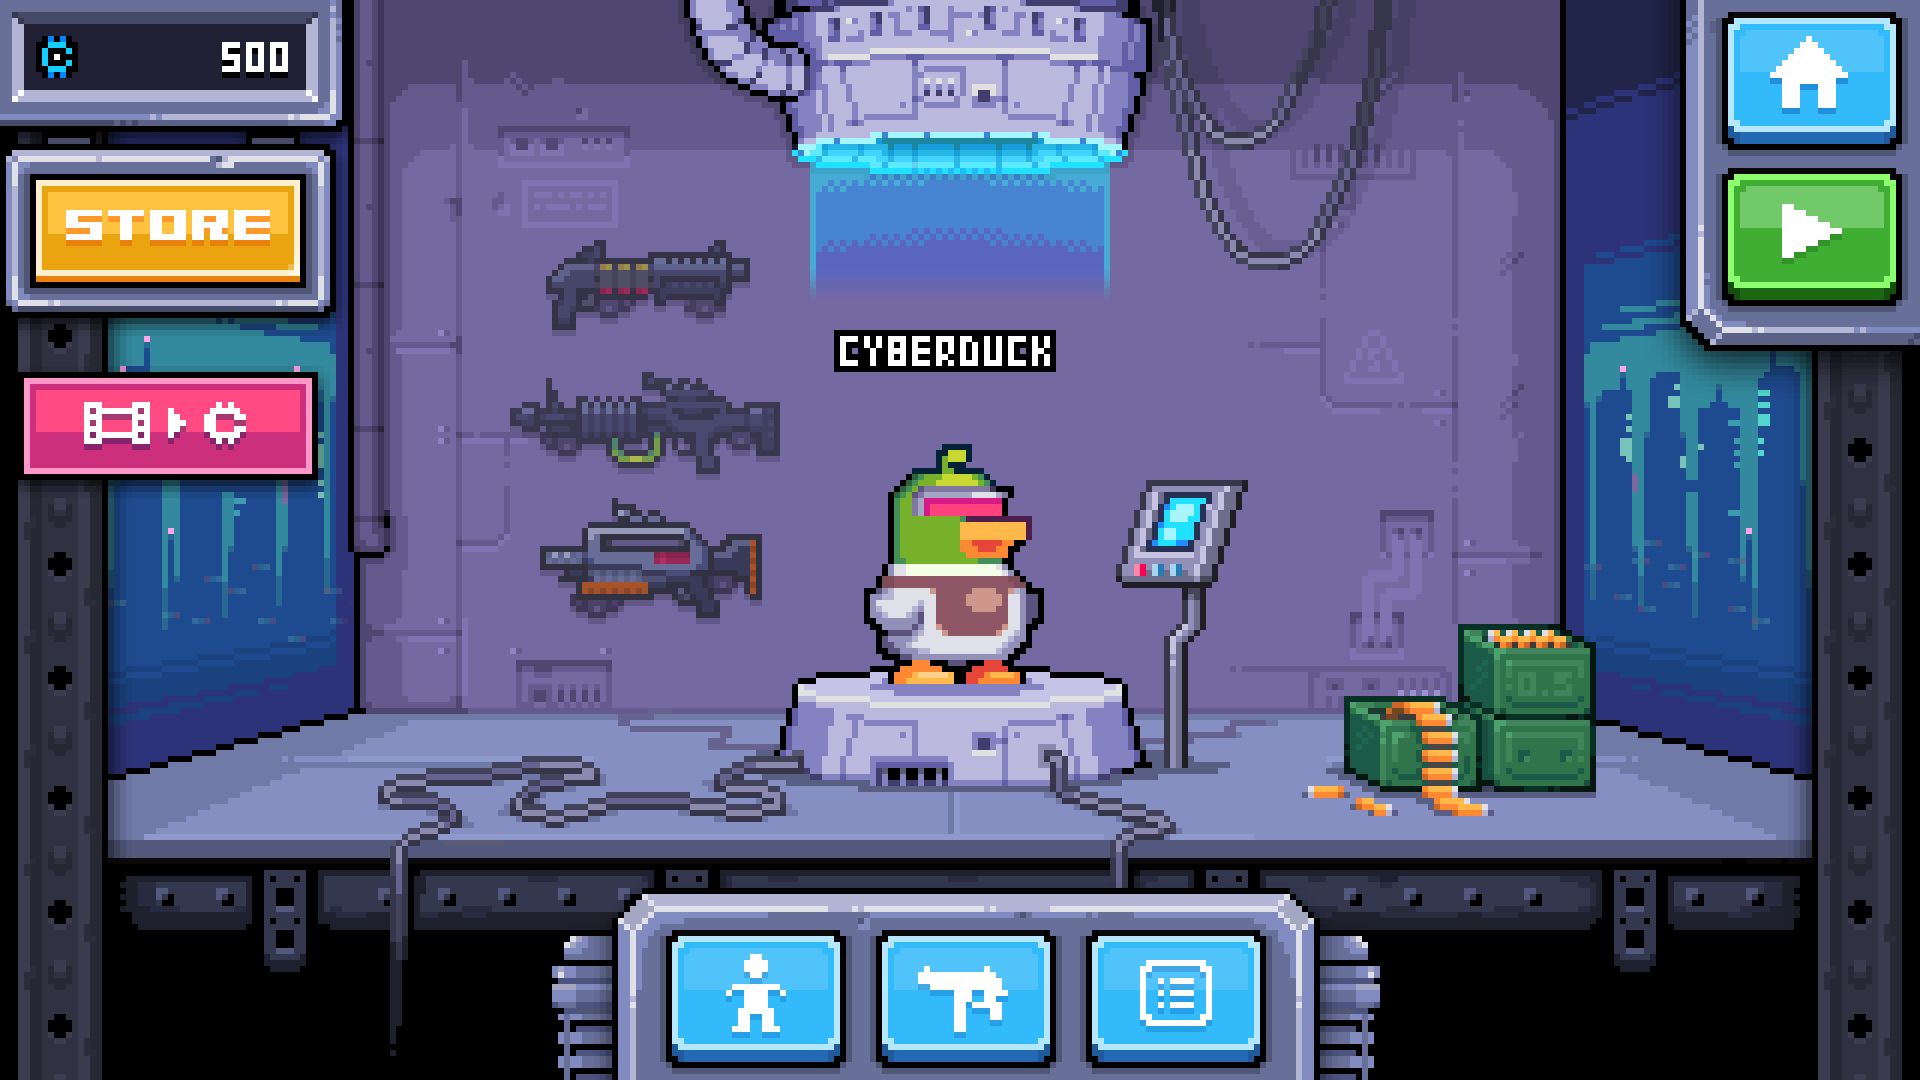 Scarica Special Agent CyberDuck gratis per Android.